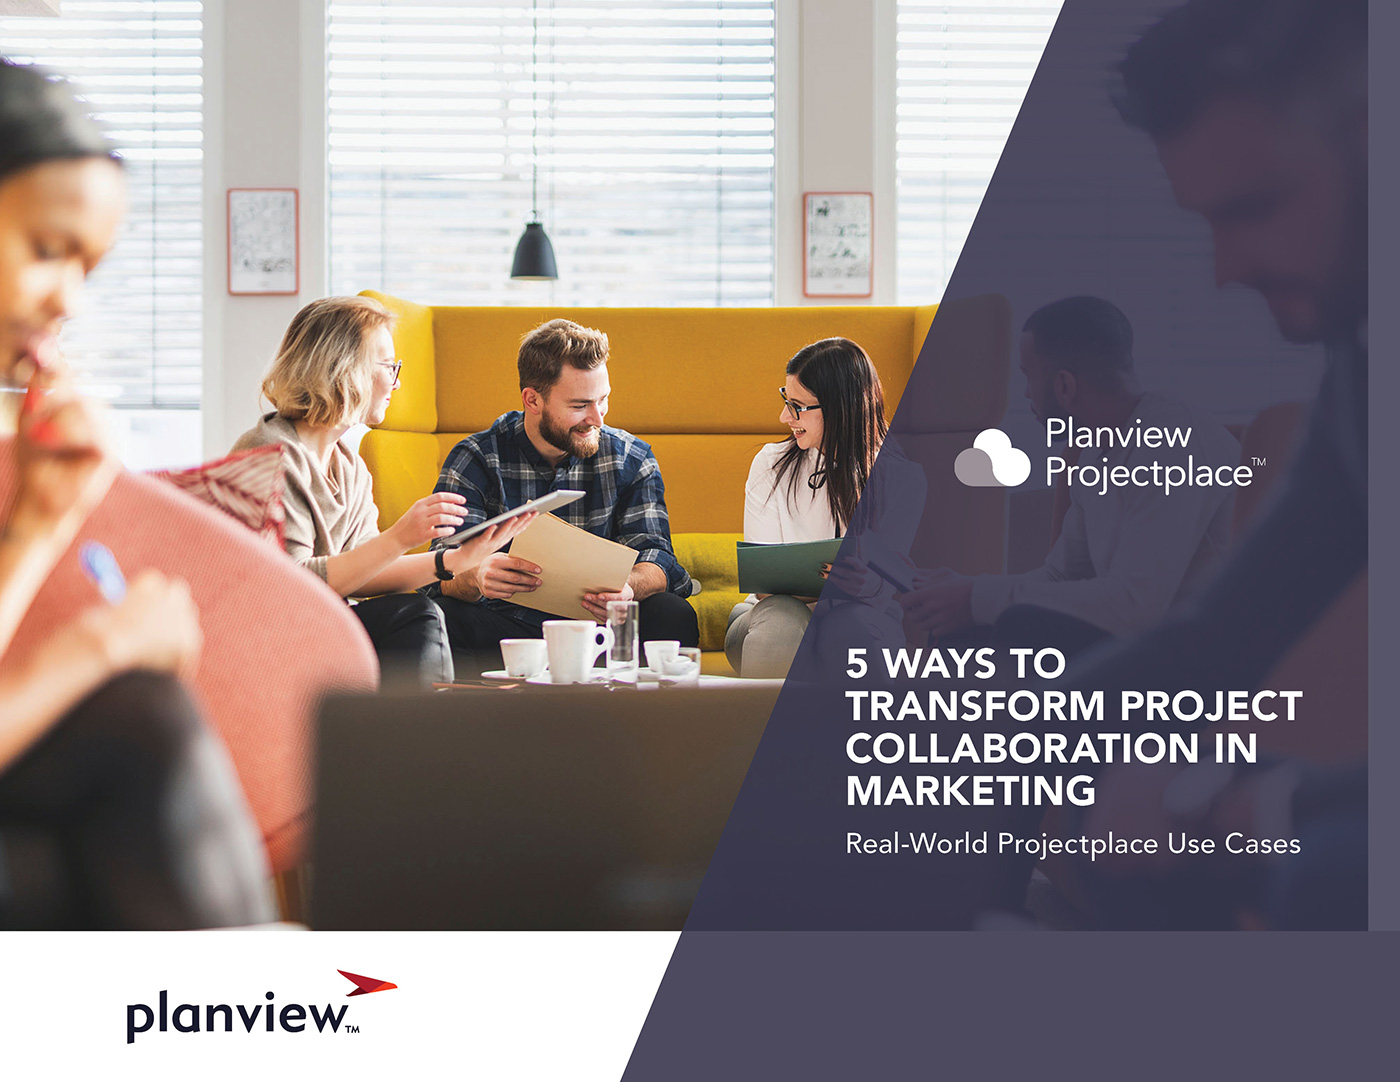 5 WAYS TO TRANSFORM PROJECT COLLABORATION IN MARKETING